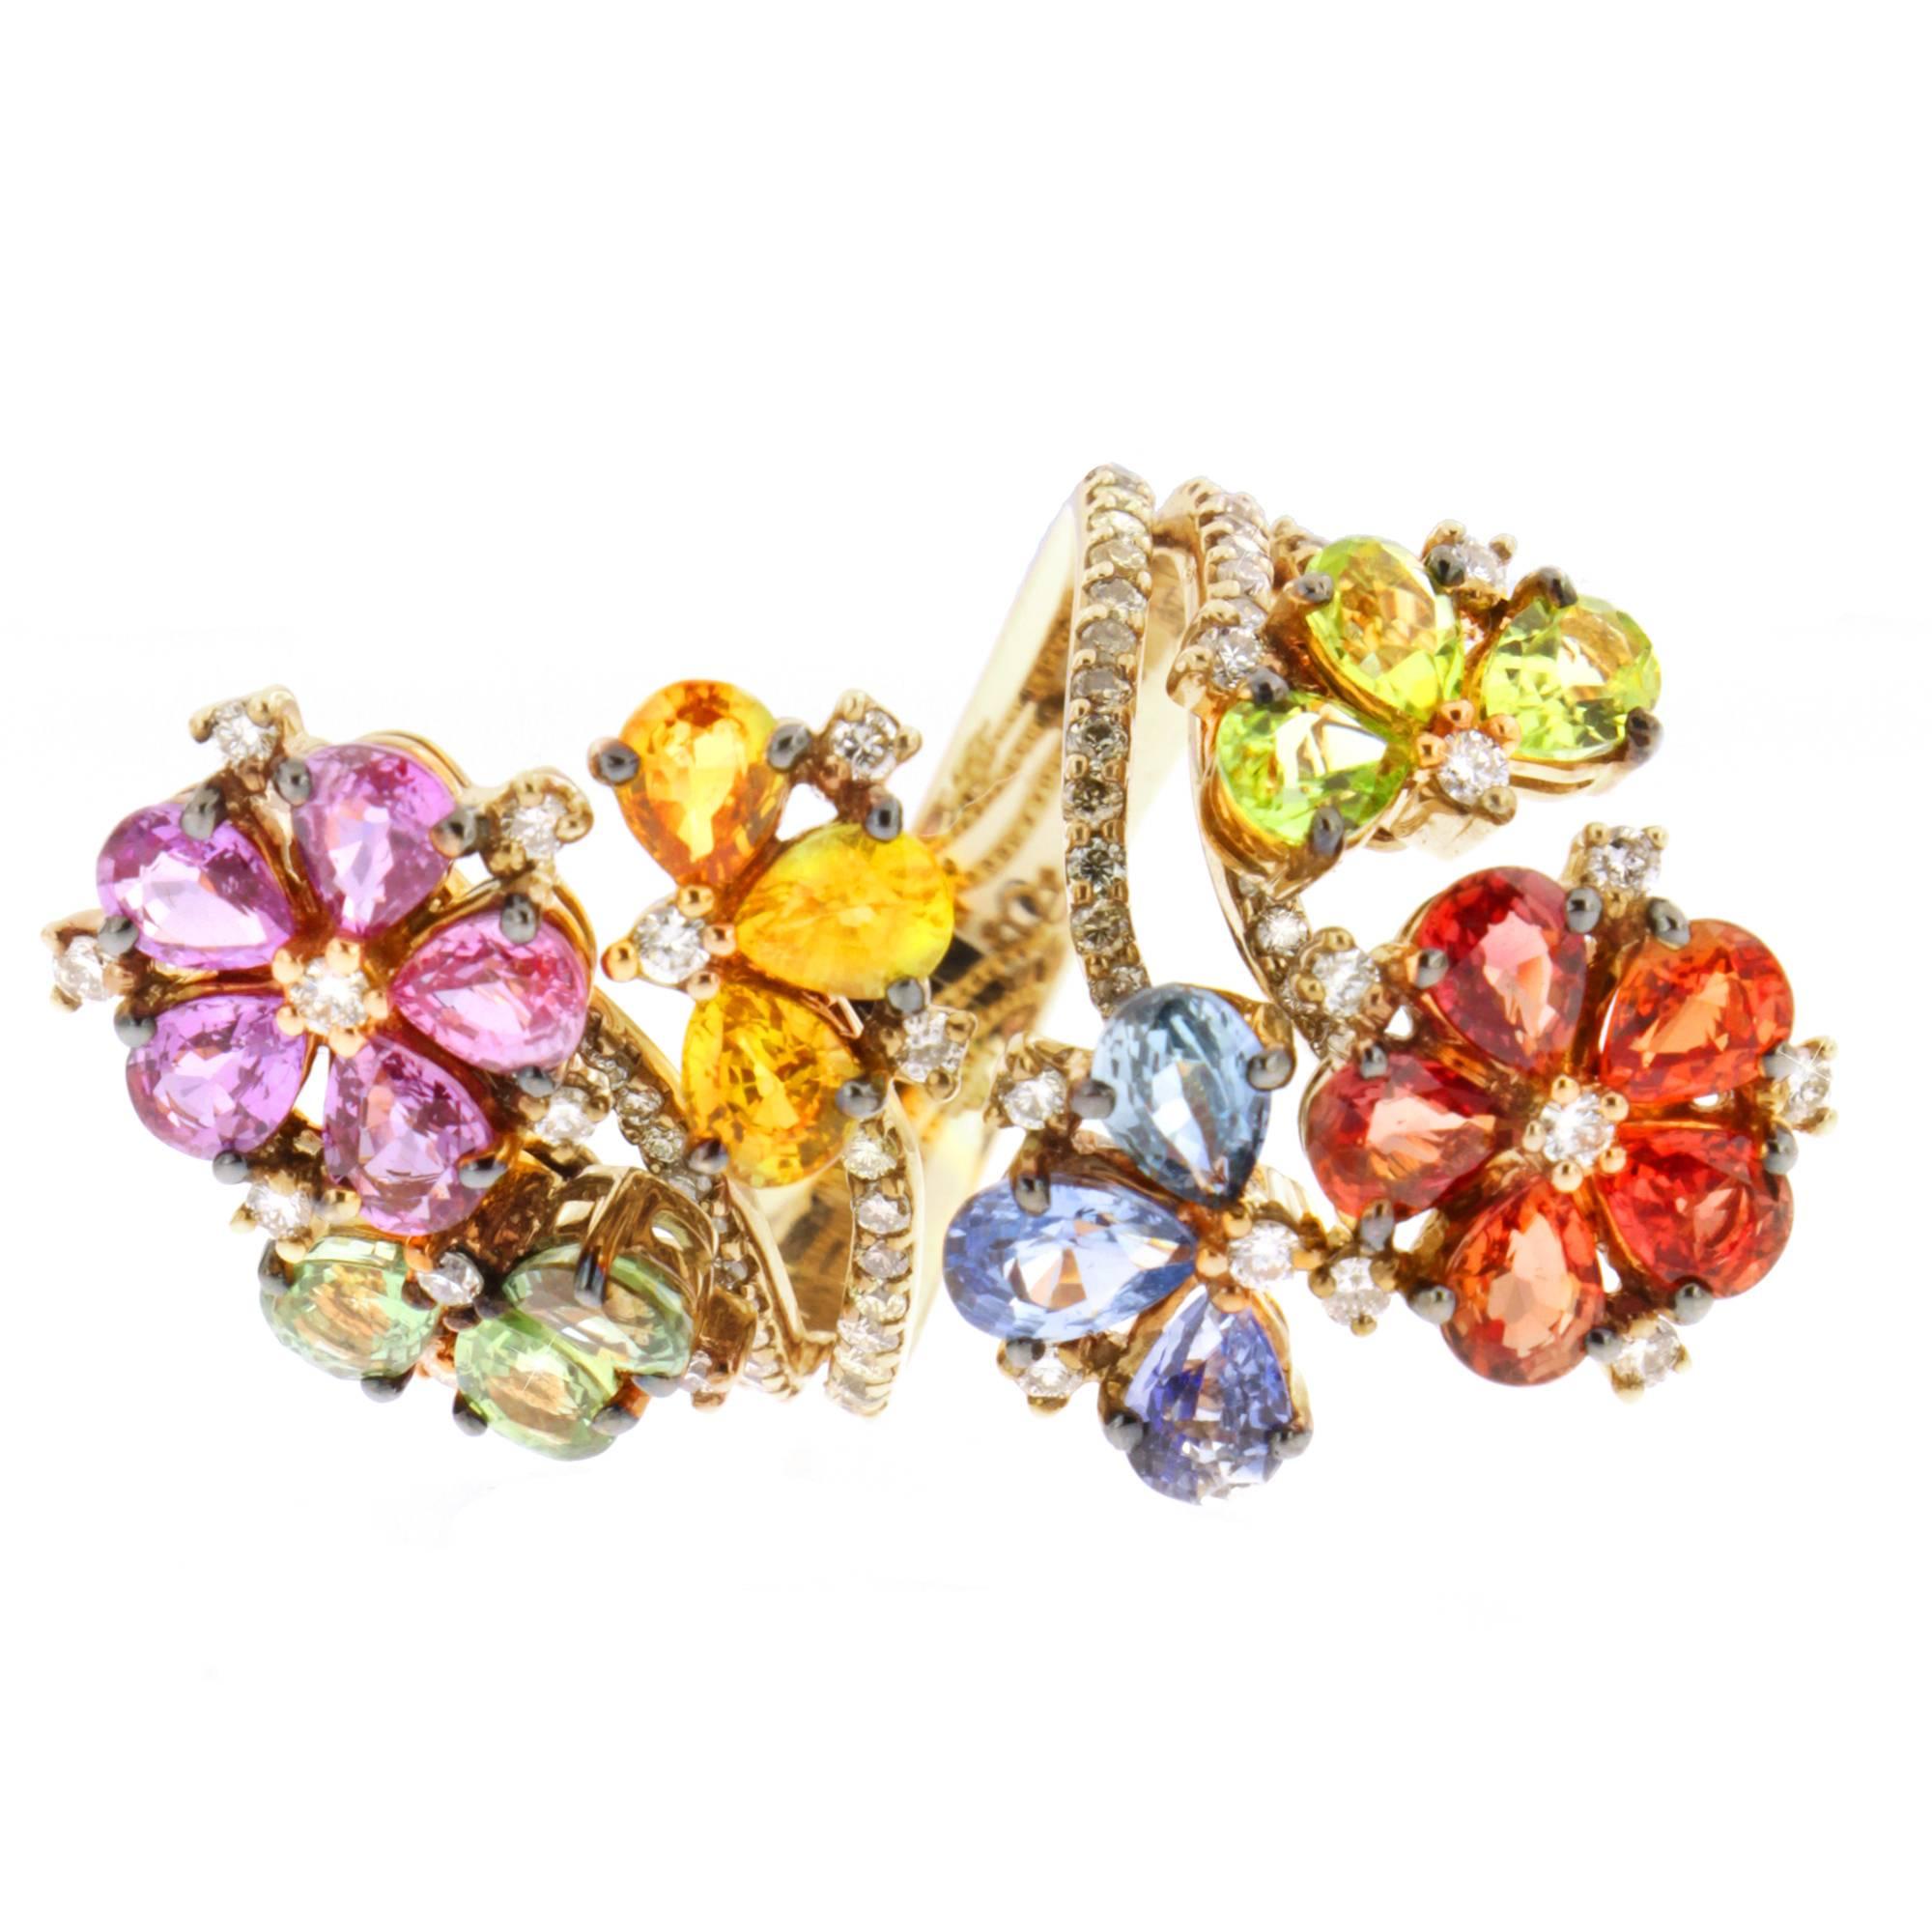 Spring ushers in a colorful floral array reminding us life is to be savored.

Bursting from 18-karat gold are the brightest of gemstone hues within the Sapphire Spring ring, a Zorab Creation. 1.45 carats of fancy sapphires engage with blue sapphires